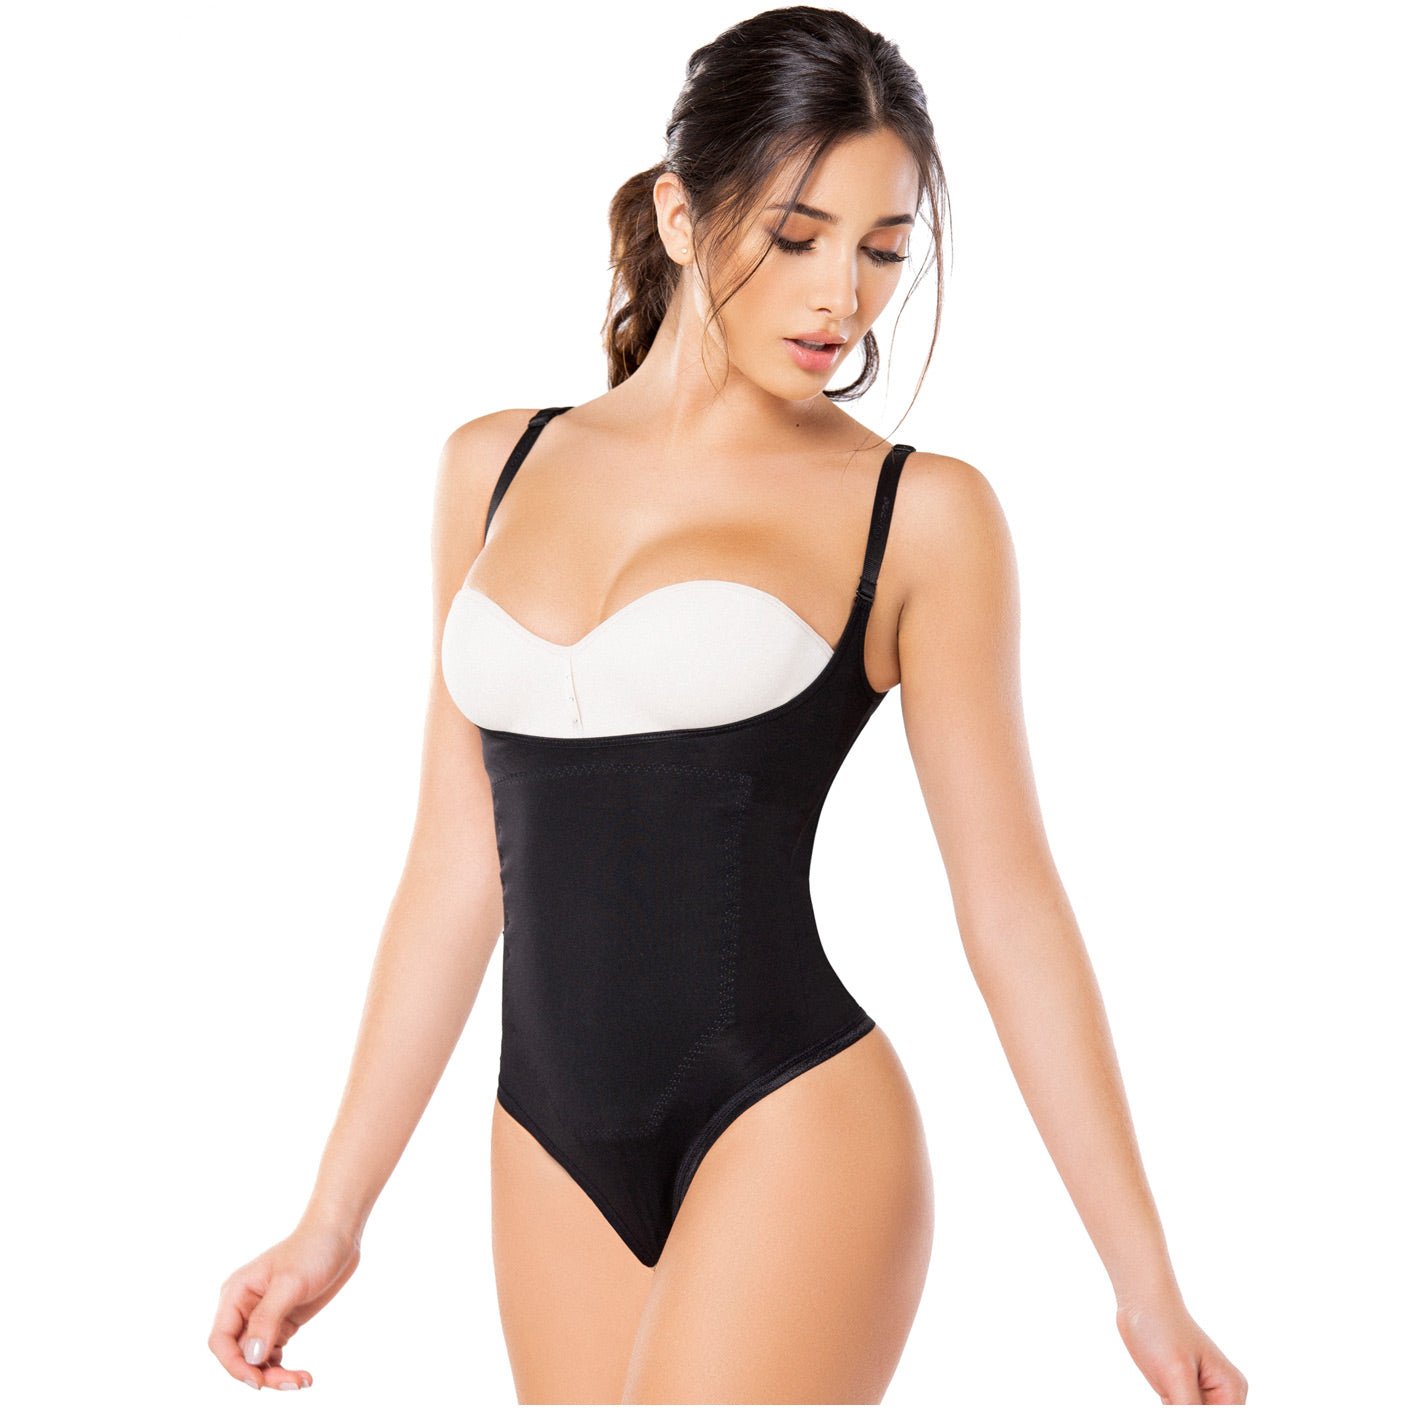 Colombian Reductora Waist Trainer Postpartum Corset Butt Lifter And  Slimming Underwear For Tummy Control And Body Shaping 231021 From Men04,  $22.87